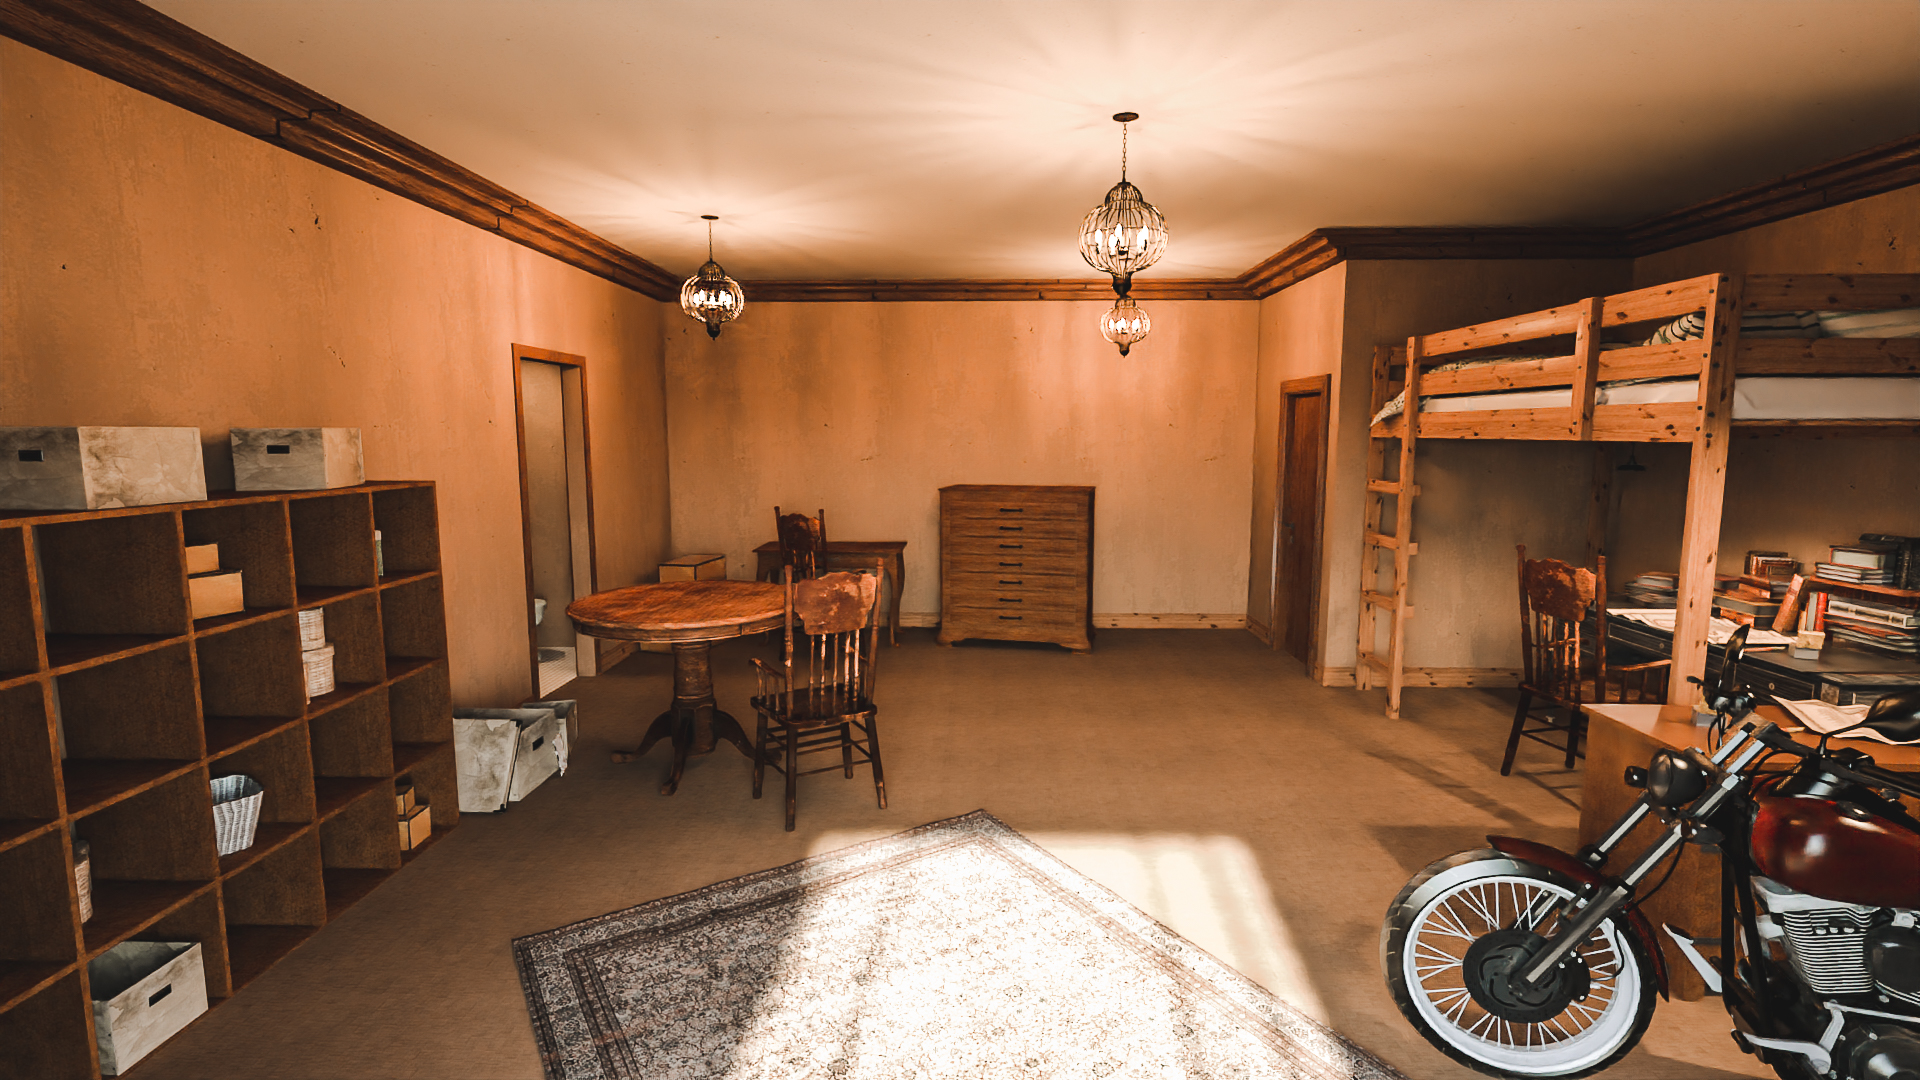 1920s Teenager Room by: Tesla3dCorp, 3D Models by Daz 3D